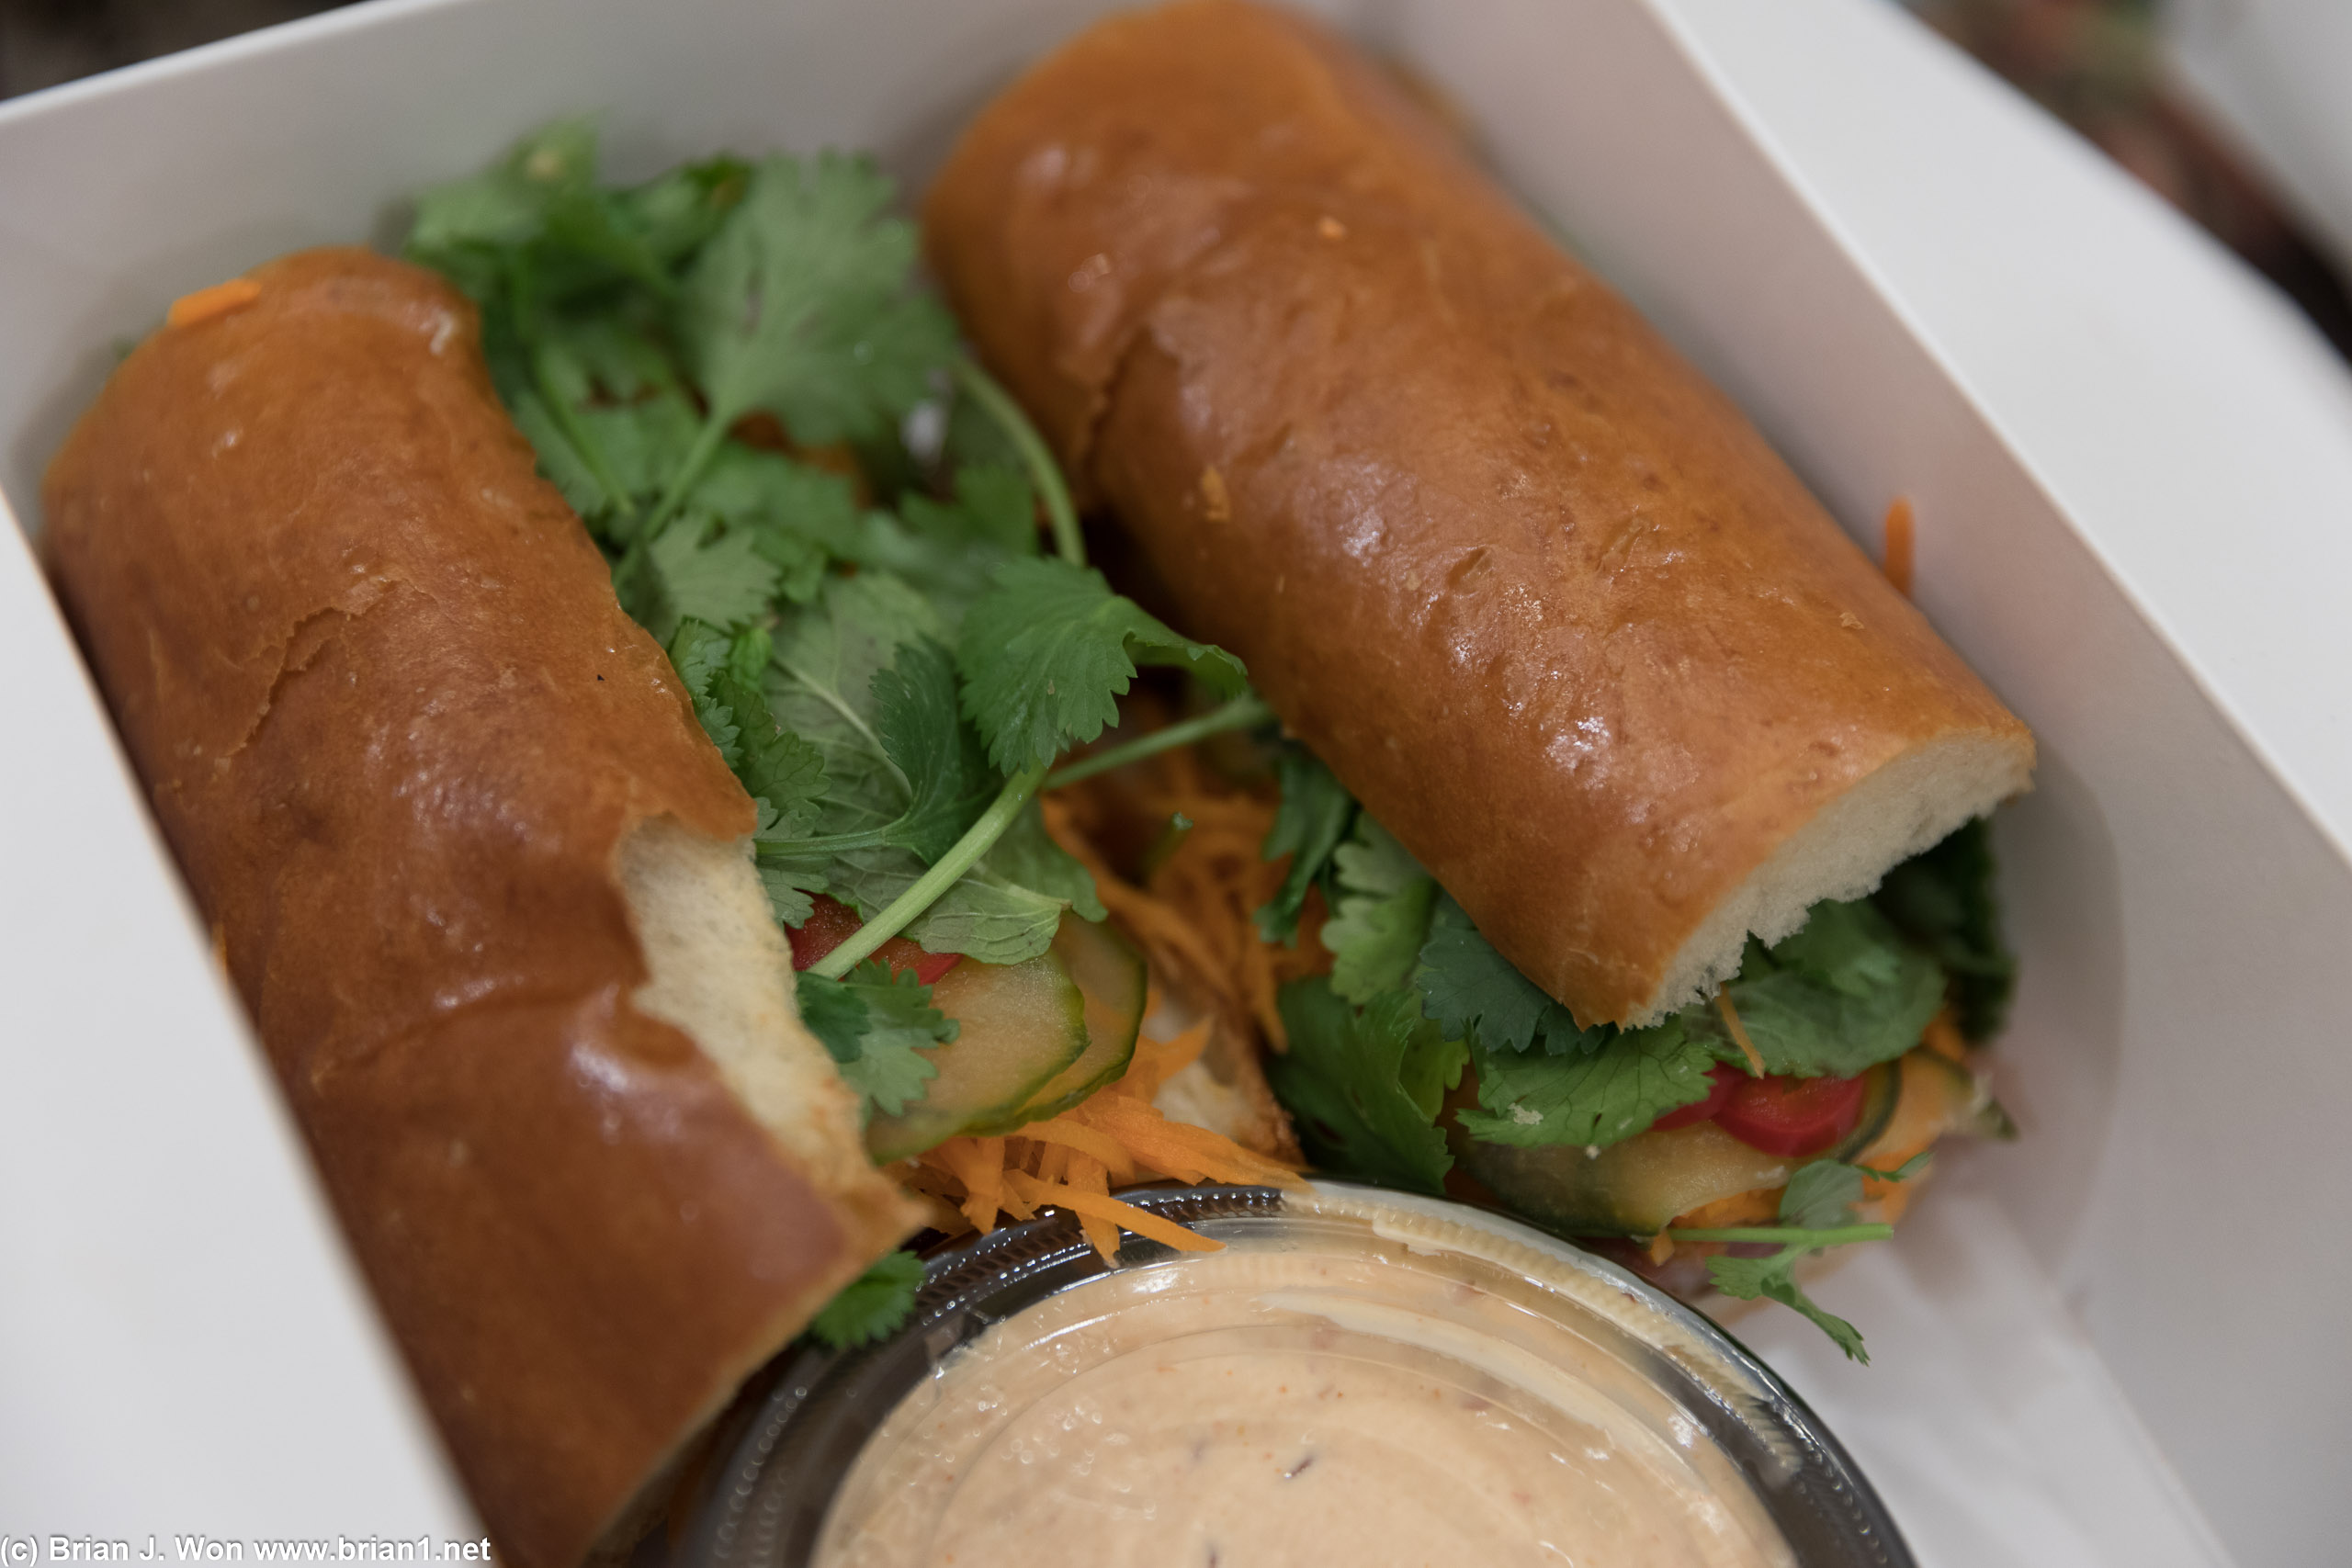 Pork belly banh mi. Like the brisket, they cooked the texture out of it. :-( t'was pretty tho.